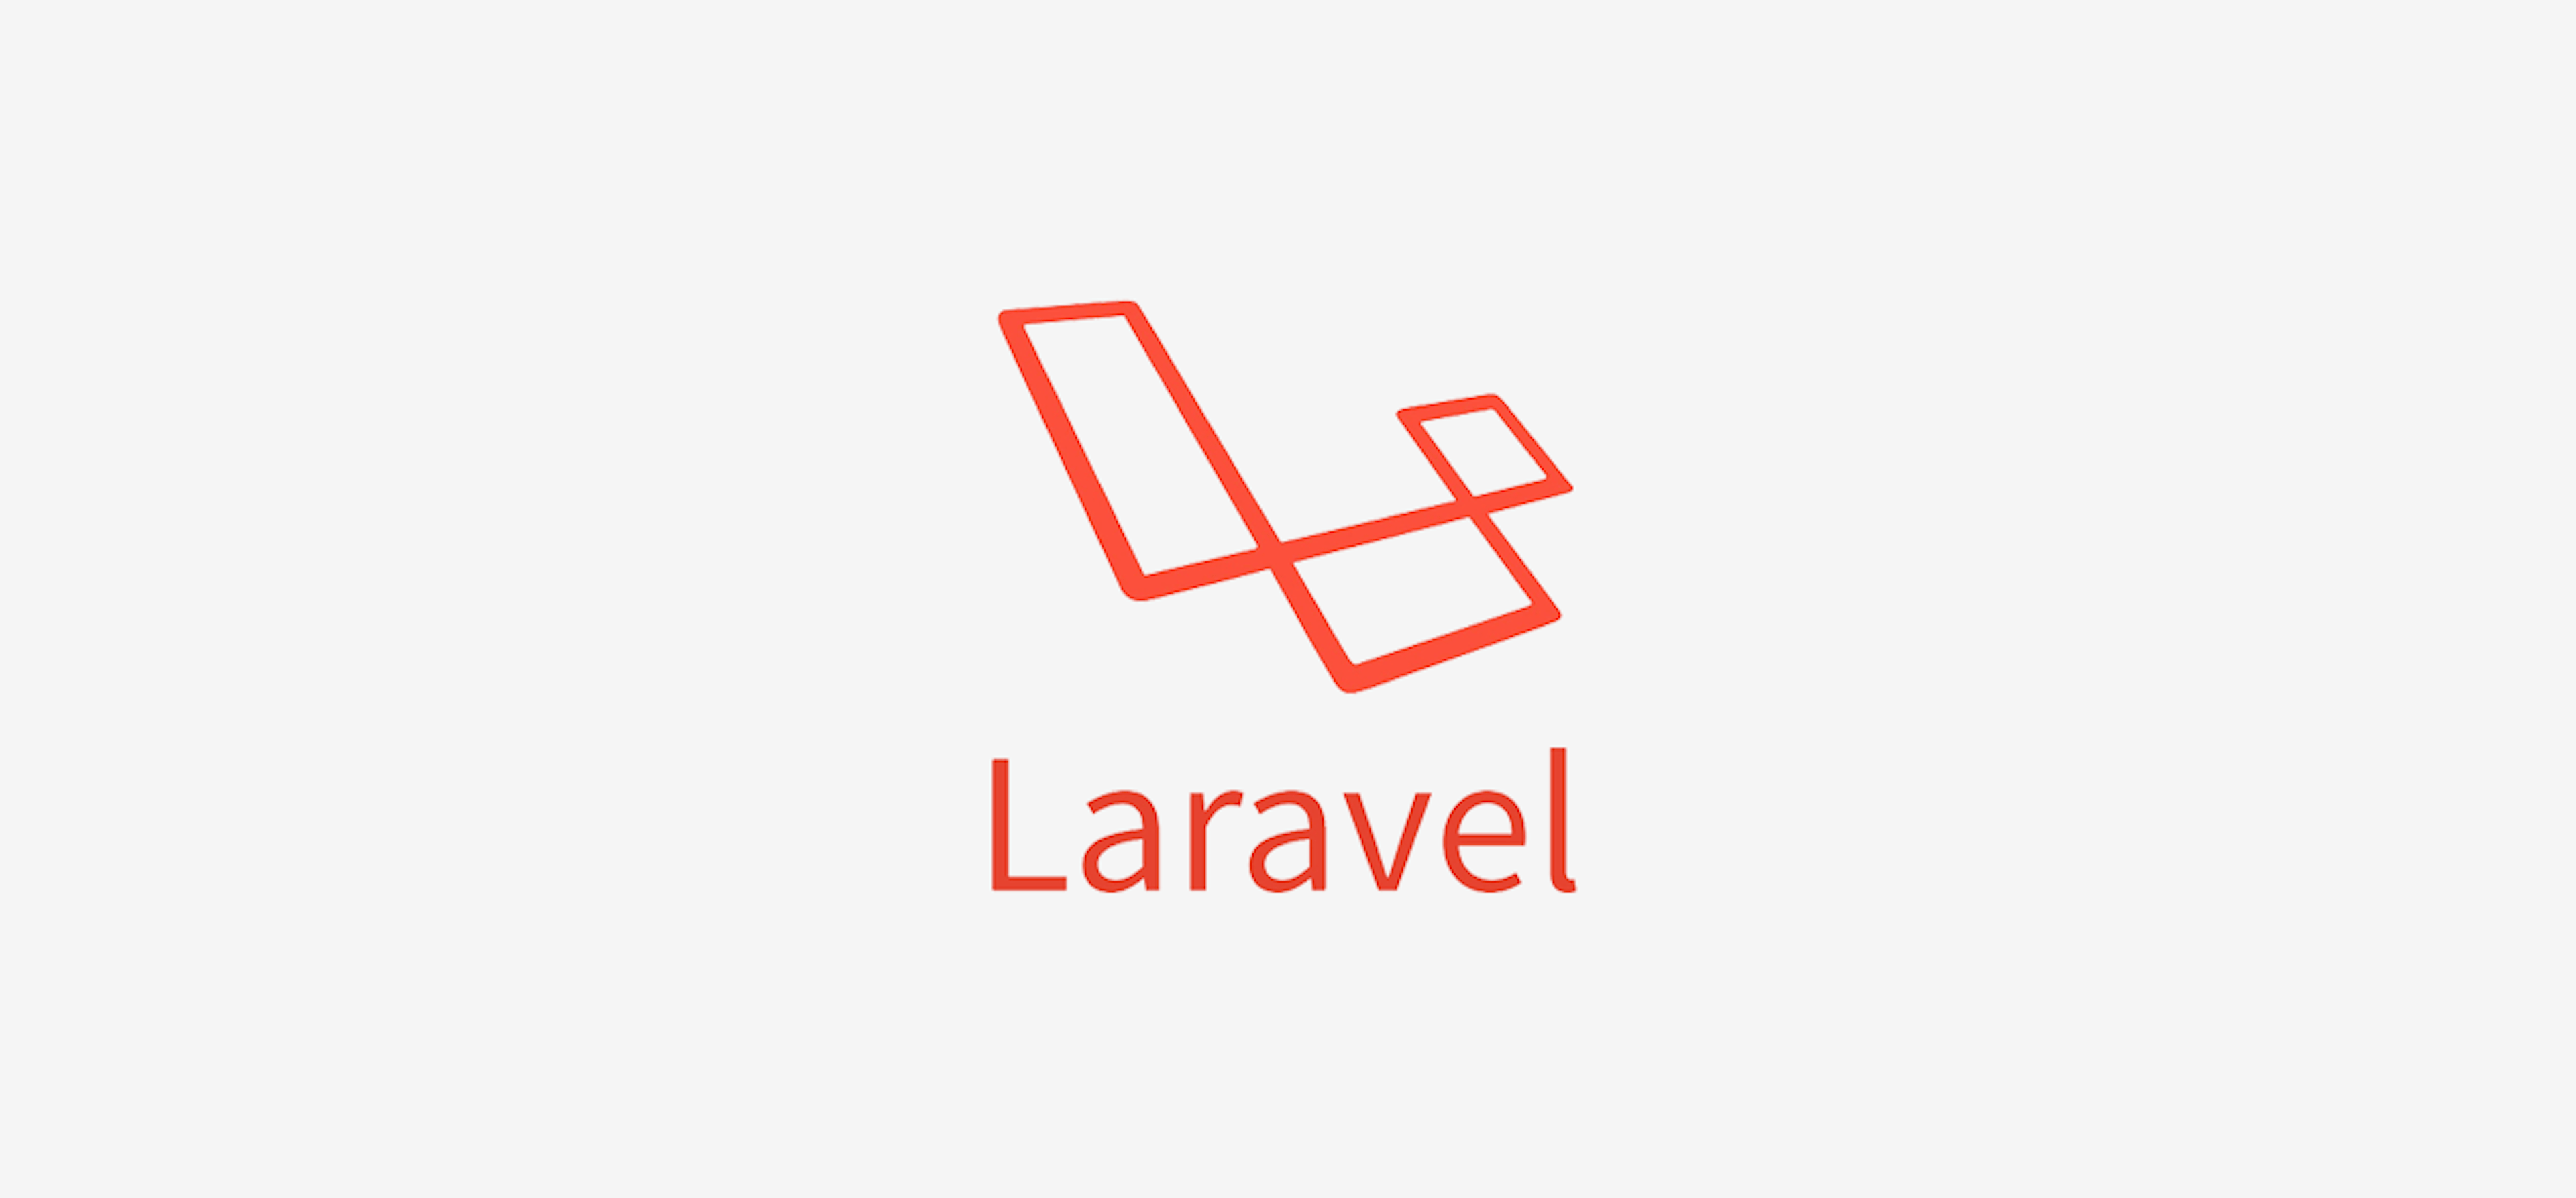 Create your own Laravel package